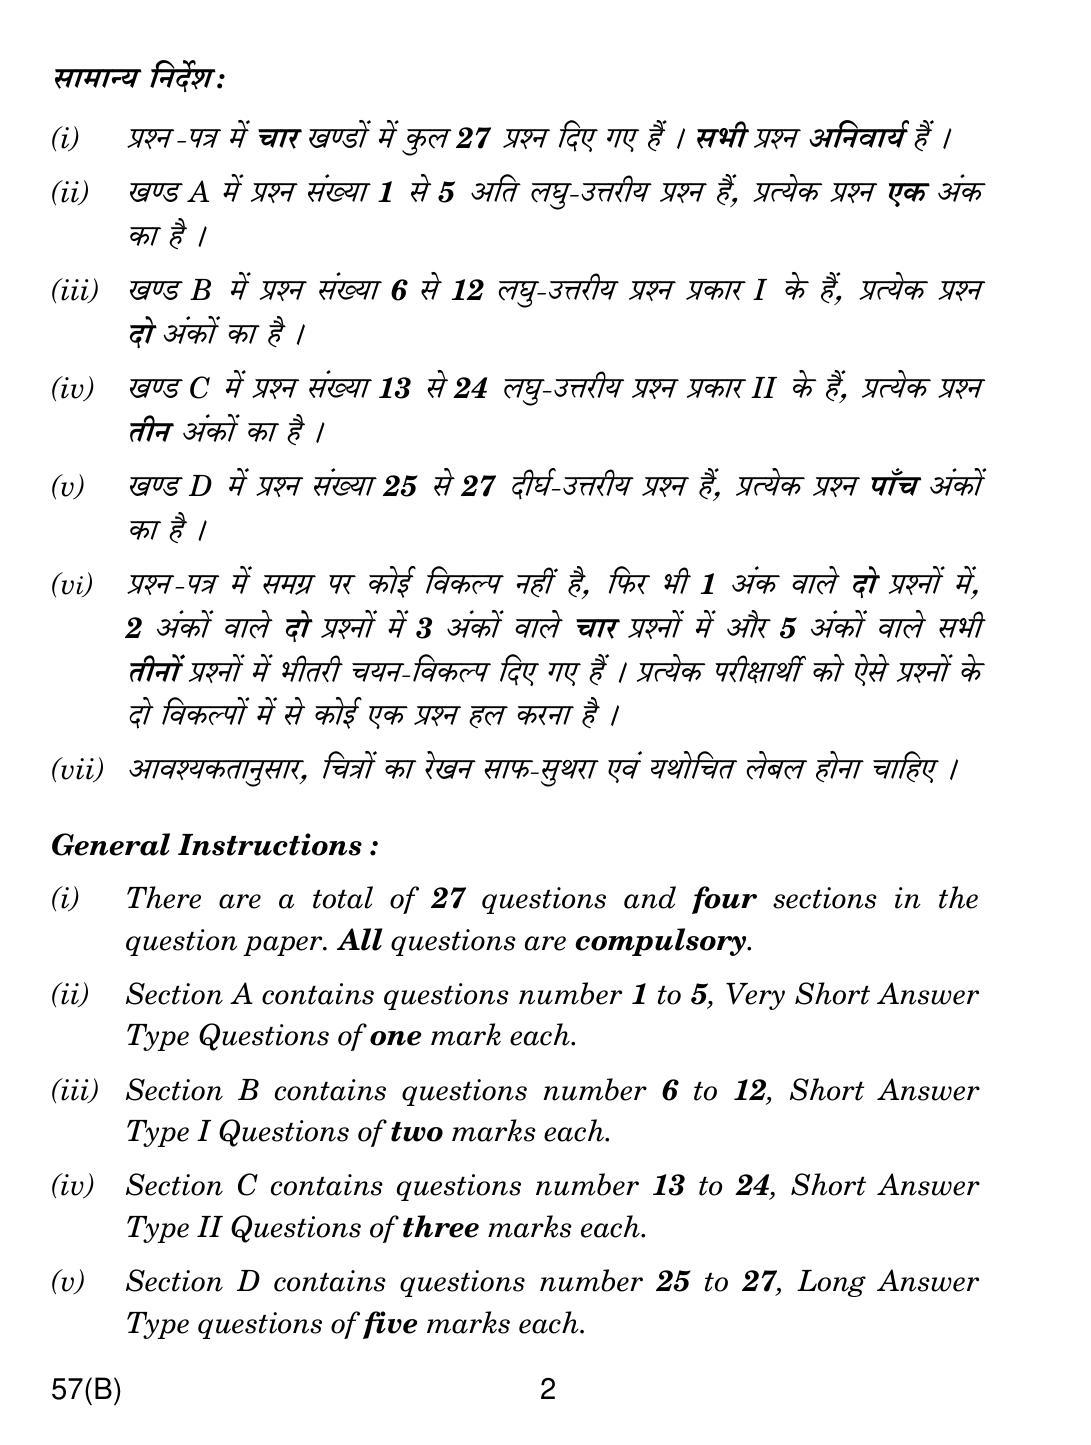 CBSE Class 12 57(B) BIOLOGY 2019 Compartment Question Paper - Page 2